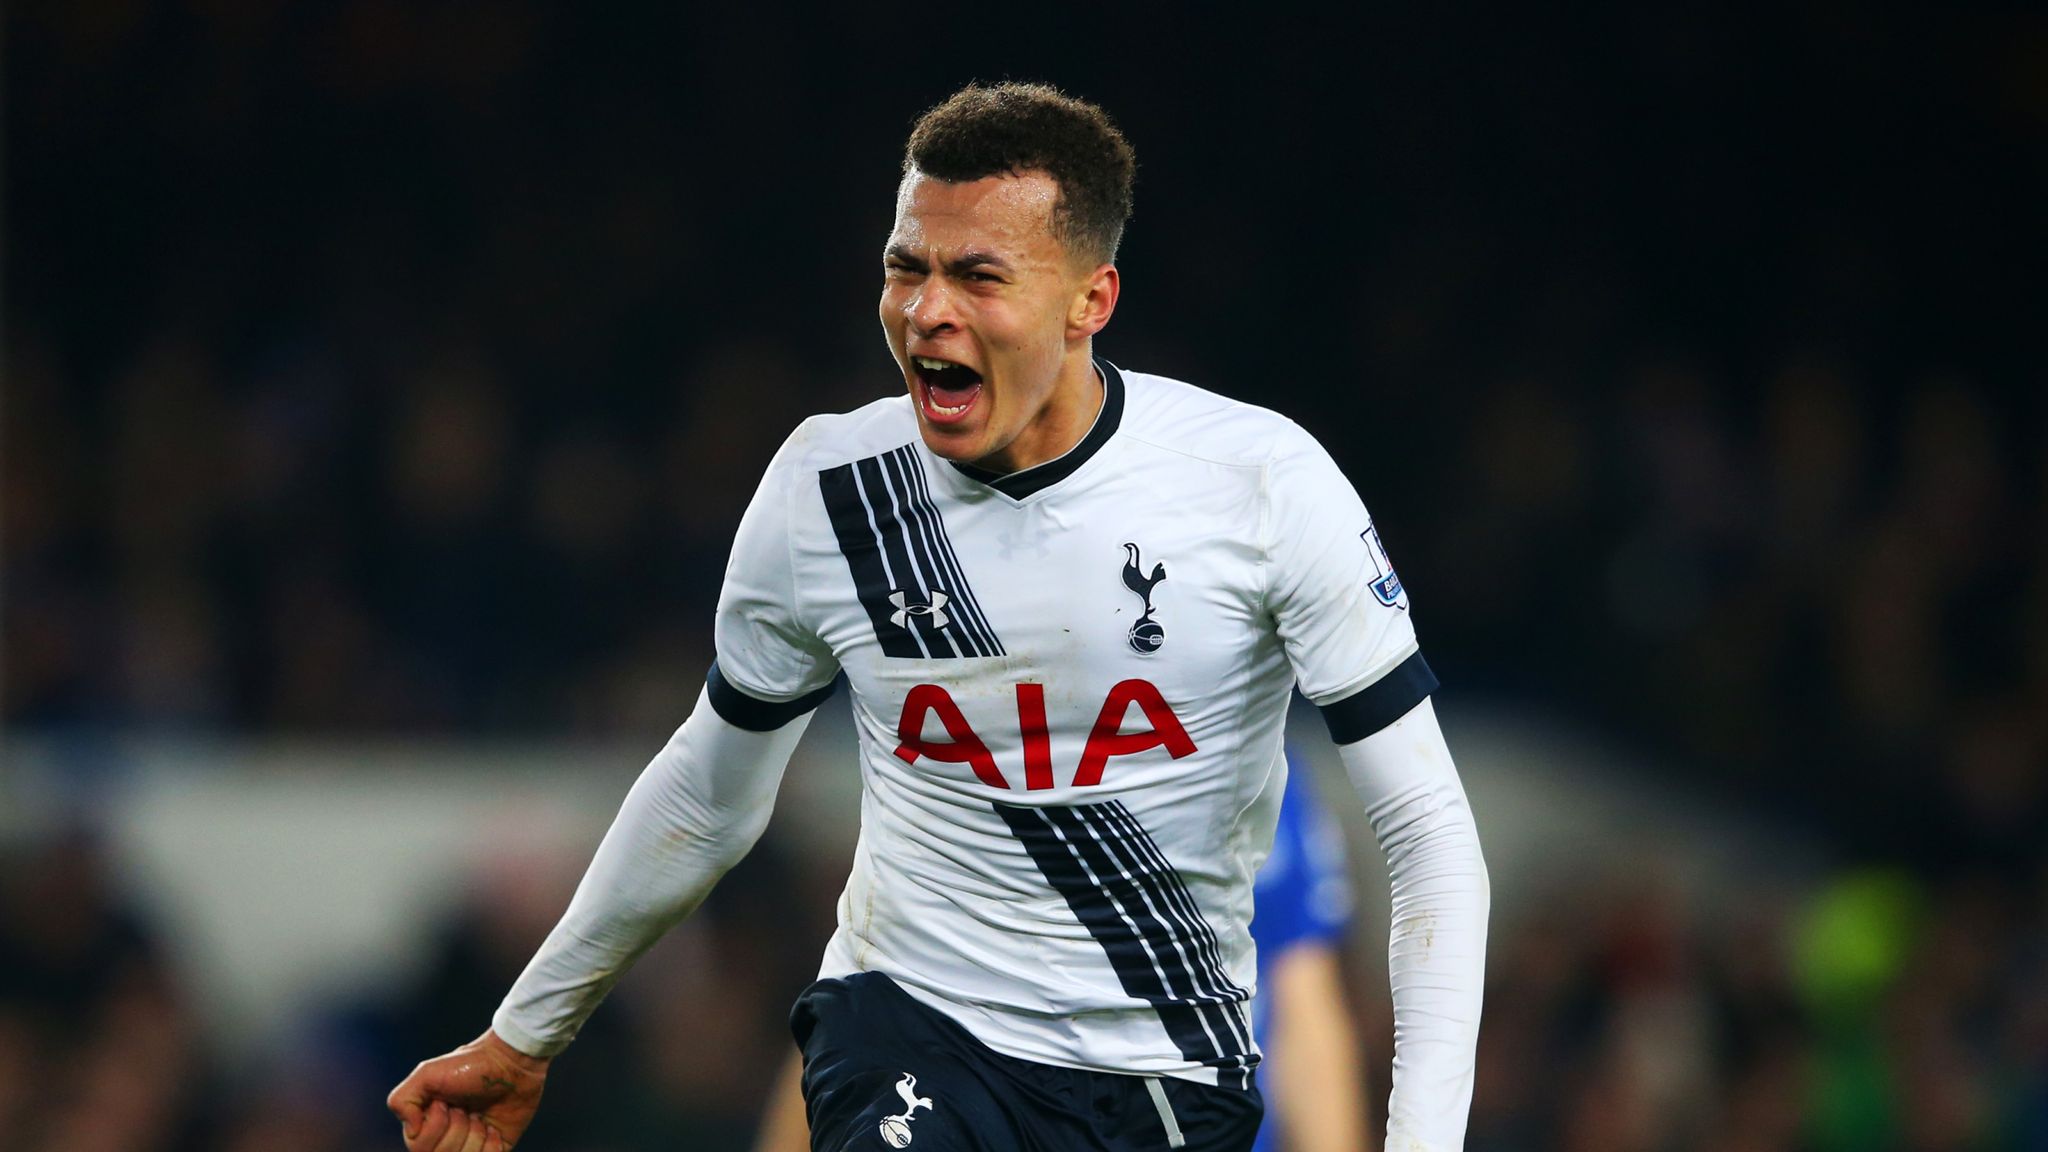 Alli can be one of best in Europe, says Sir Alex